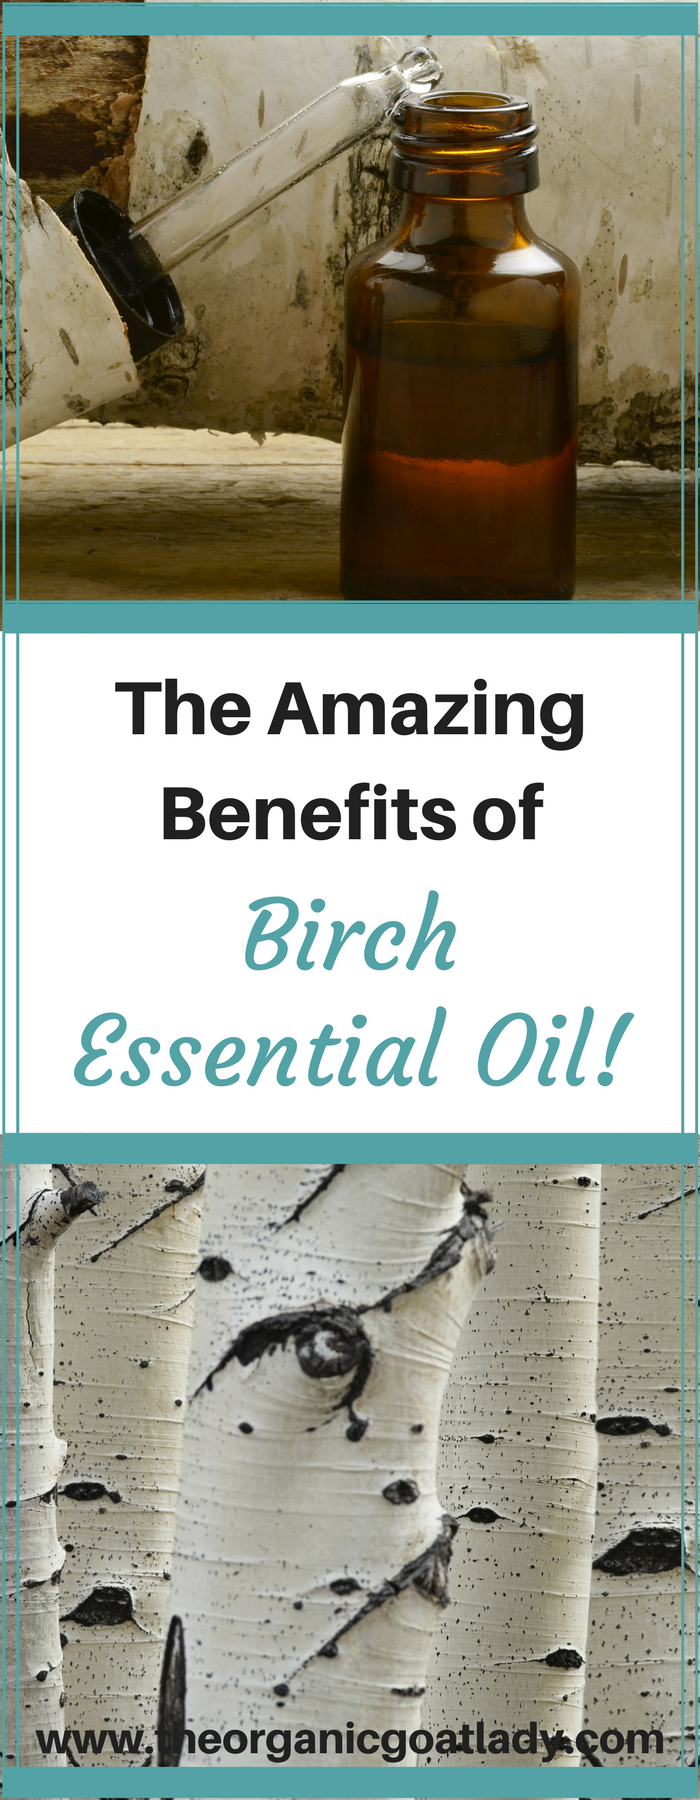 The Amazing Benefits of Birch Essential Oil!